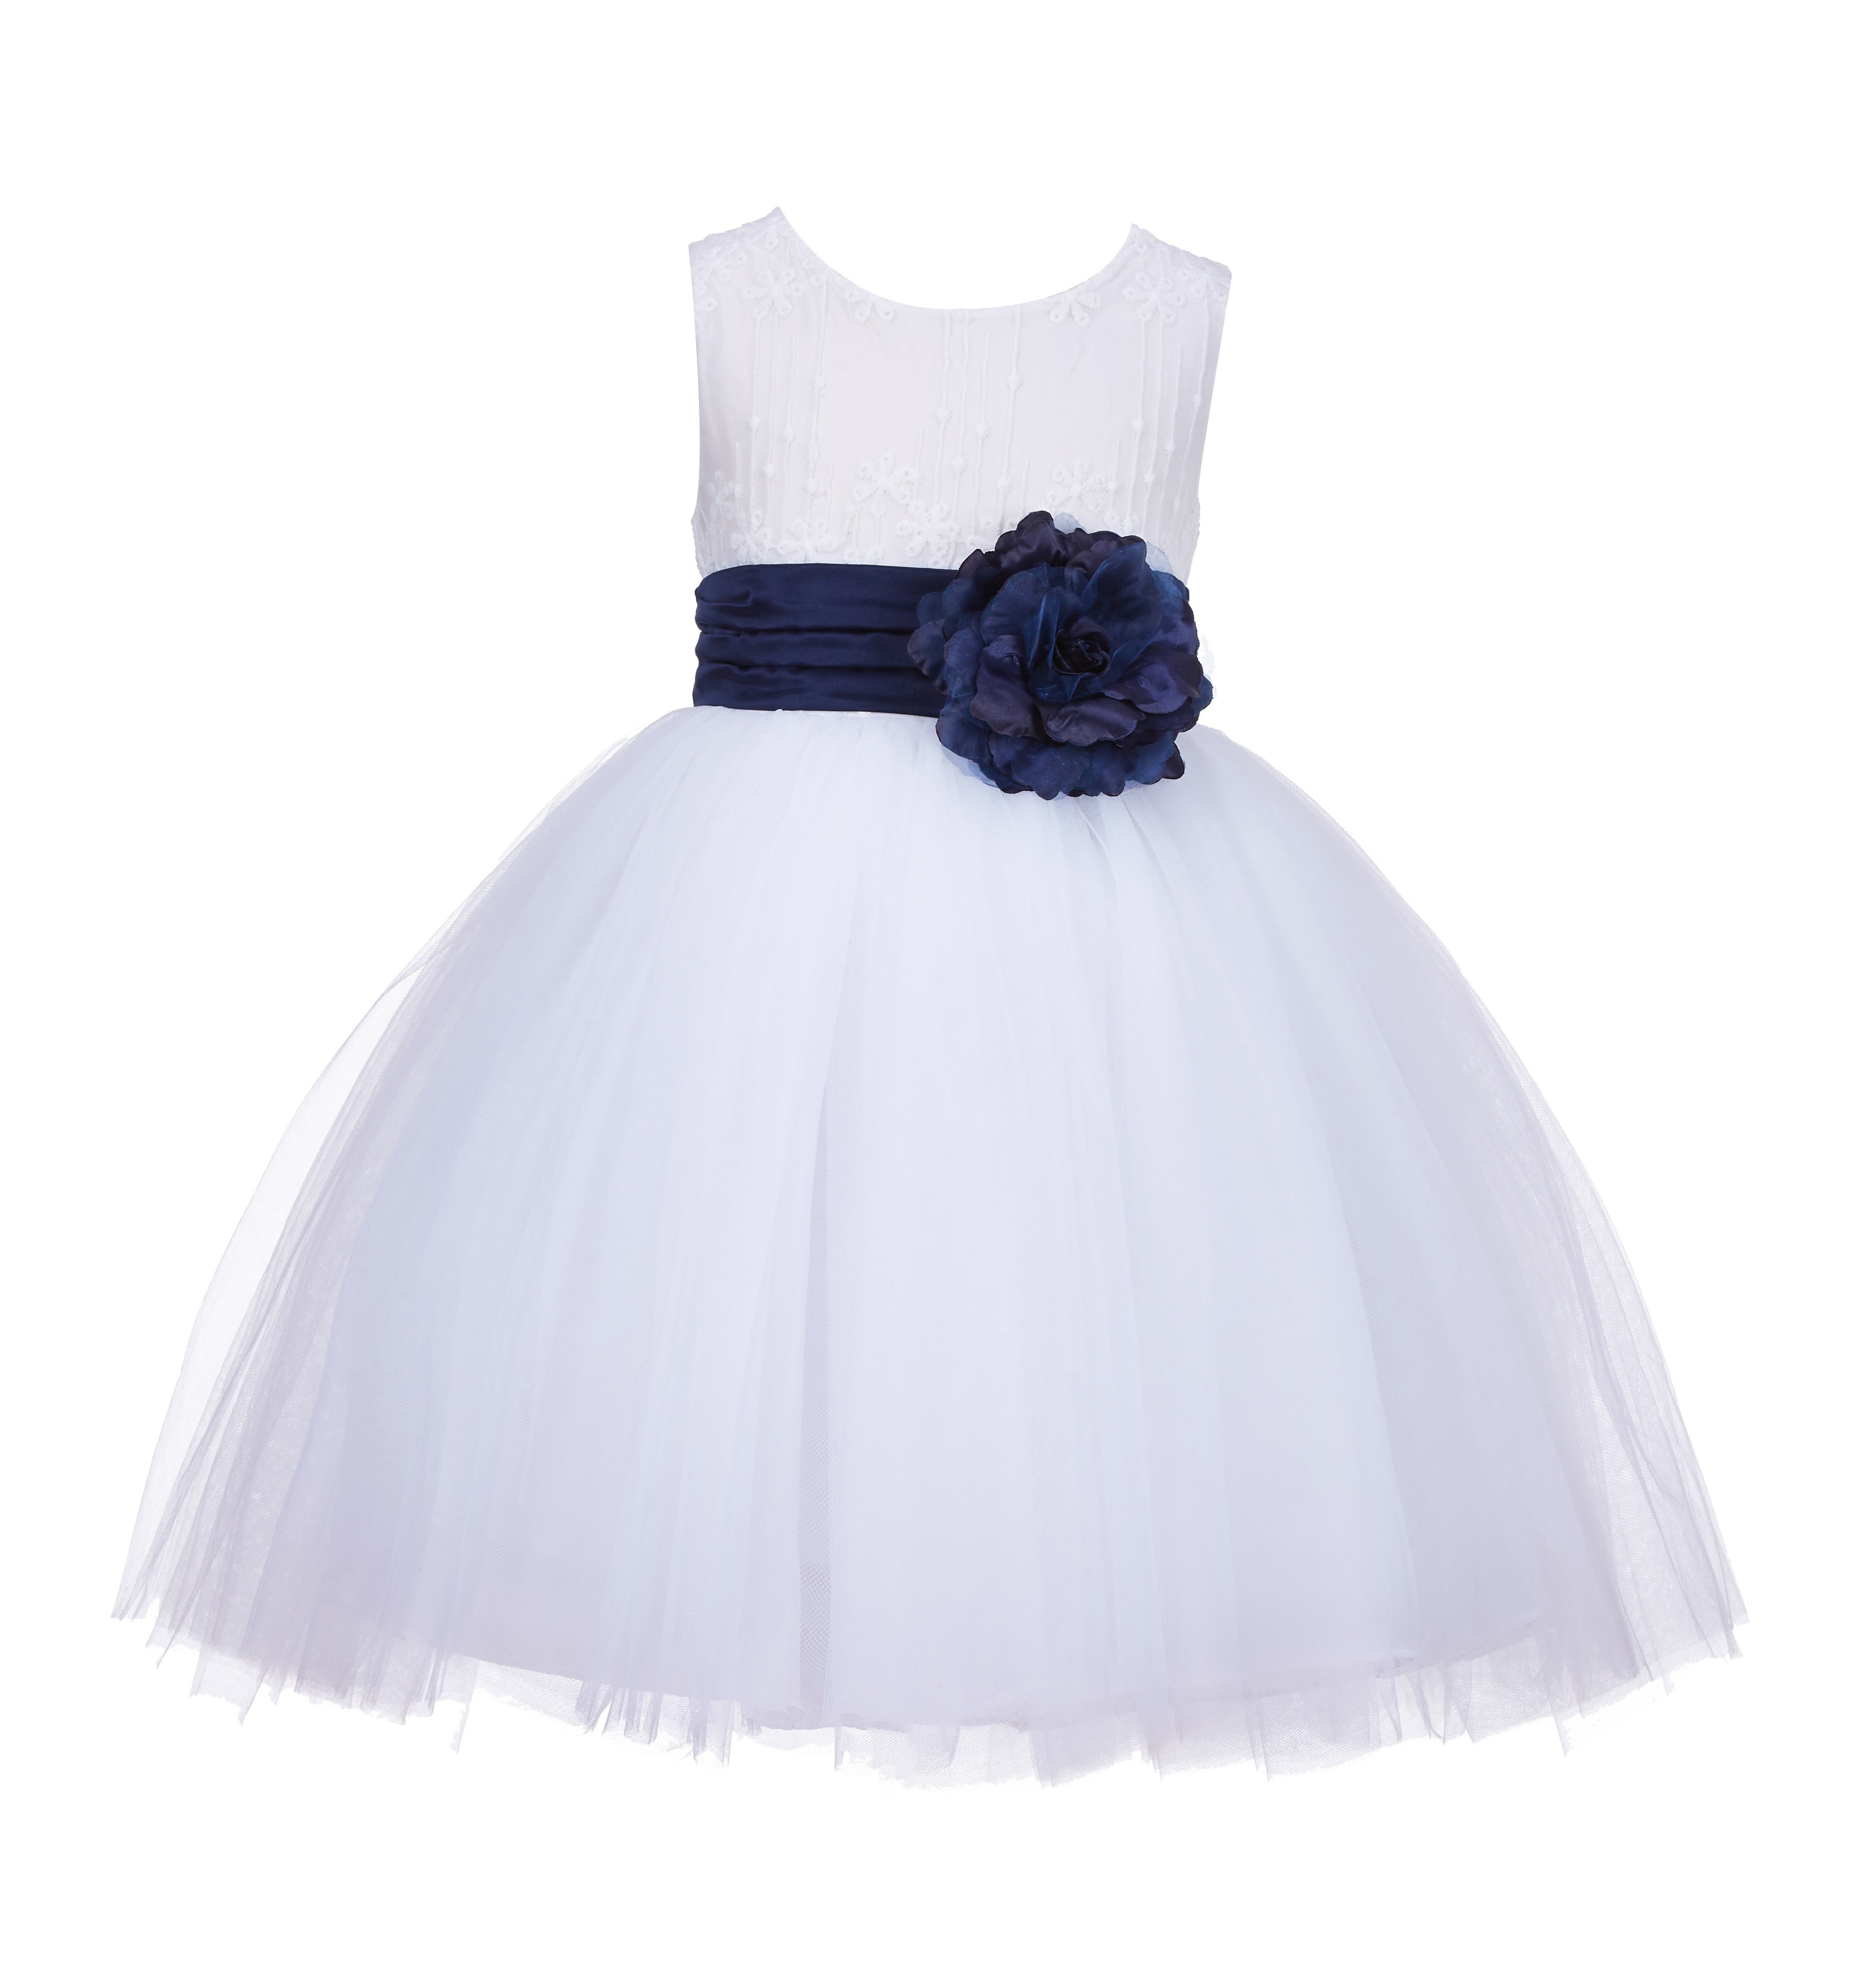 White/Navy Lace Embroidery Tulle Flower Girl Dress Wedding 118